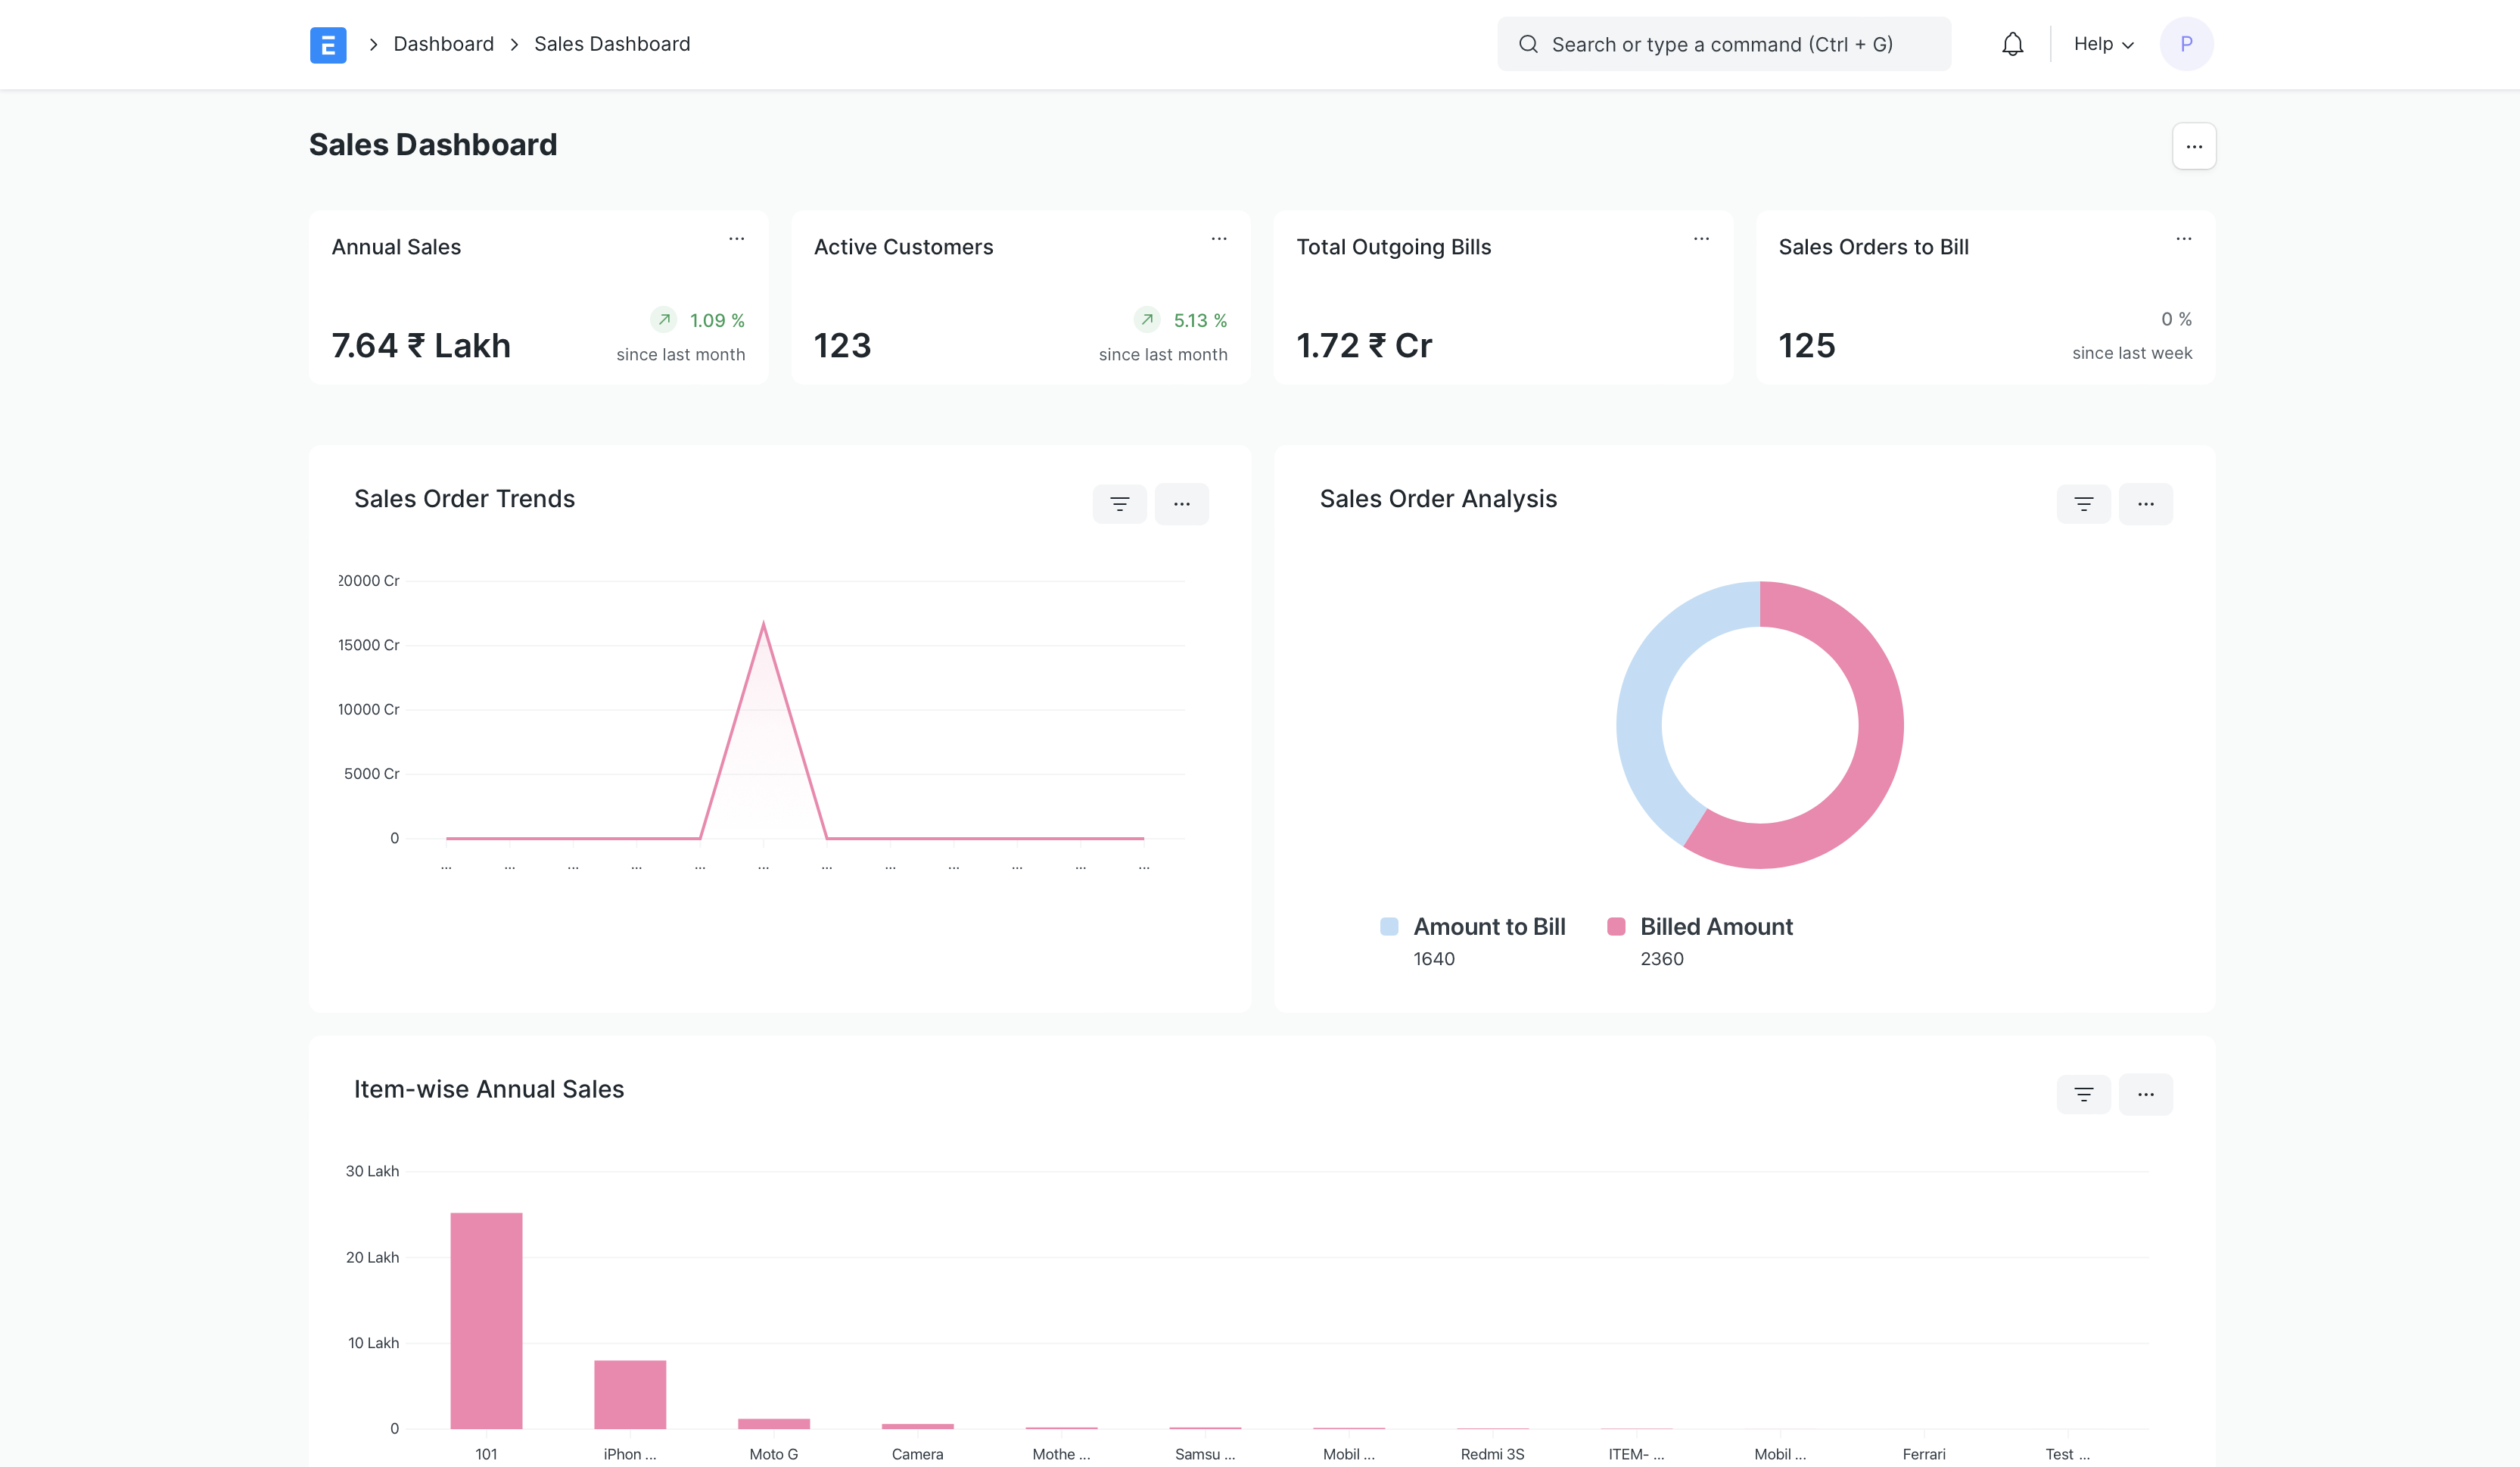 Configure your dashboard to view the graphs, numbers and progress you prefer in one glance.